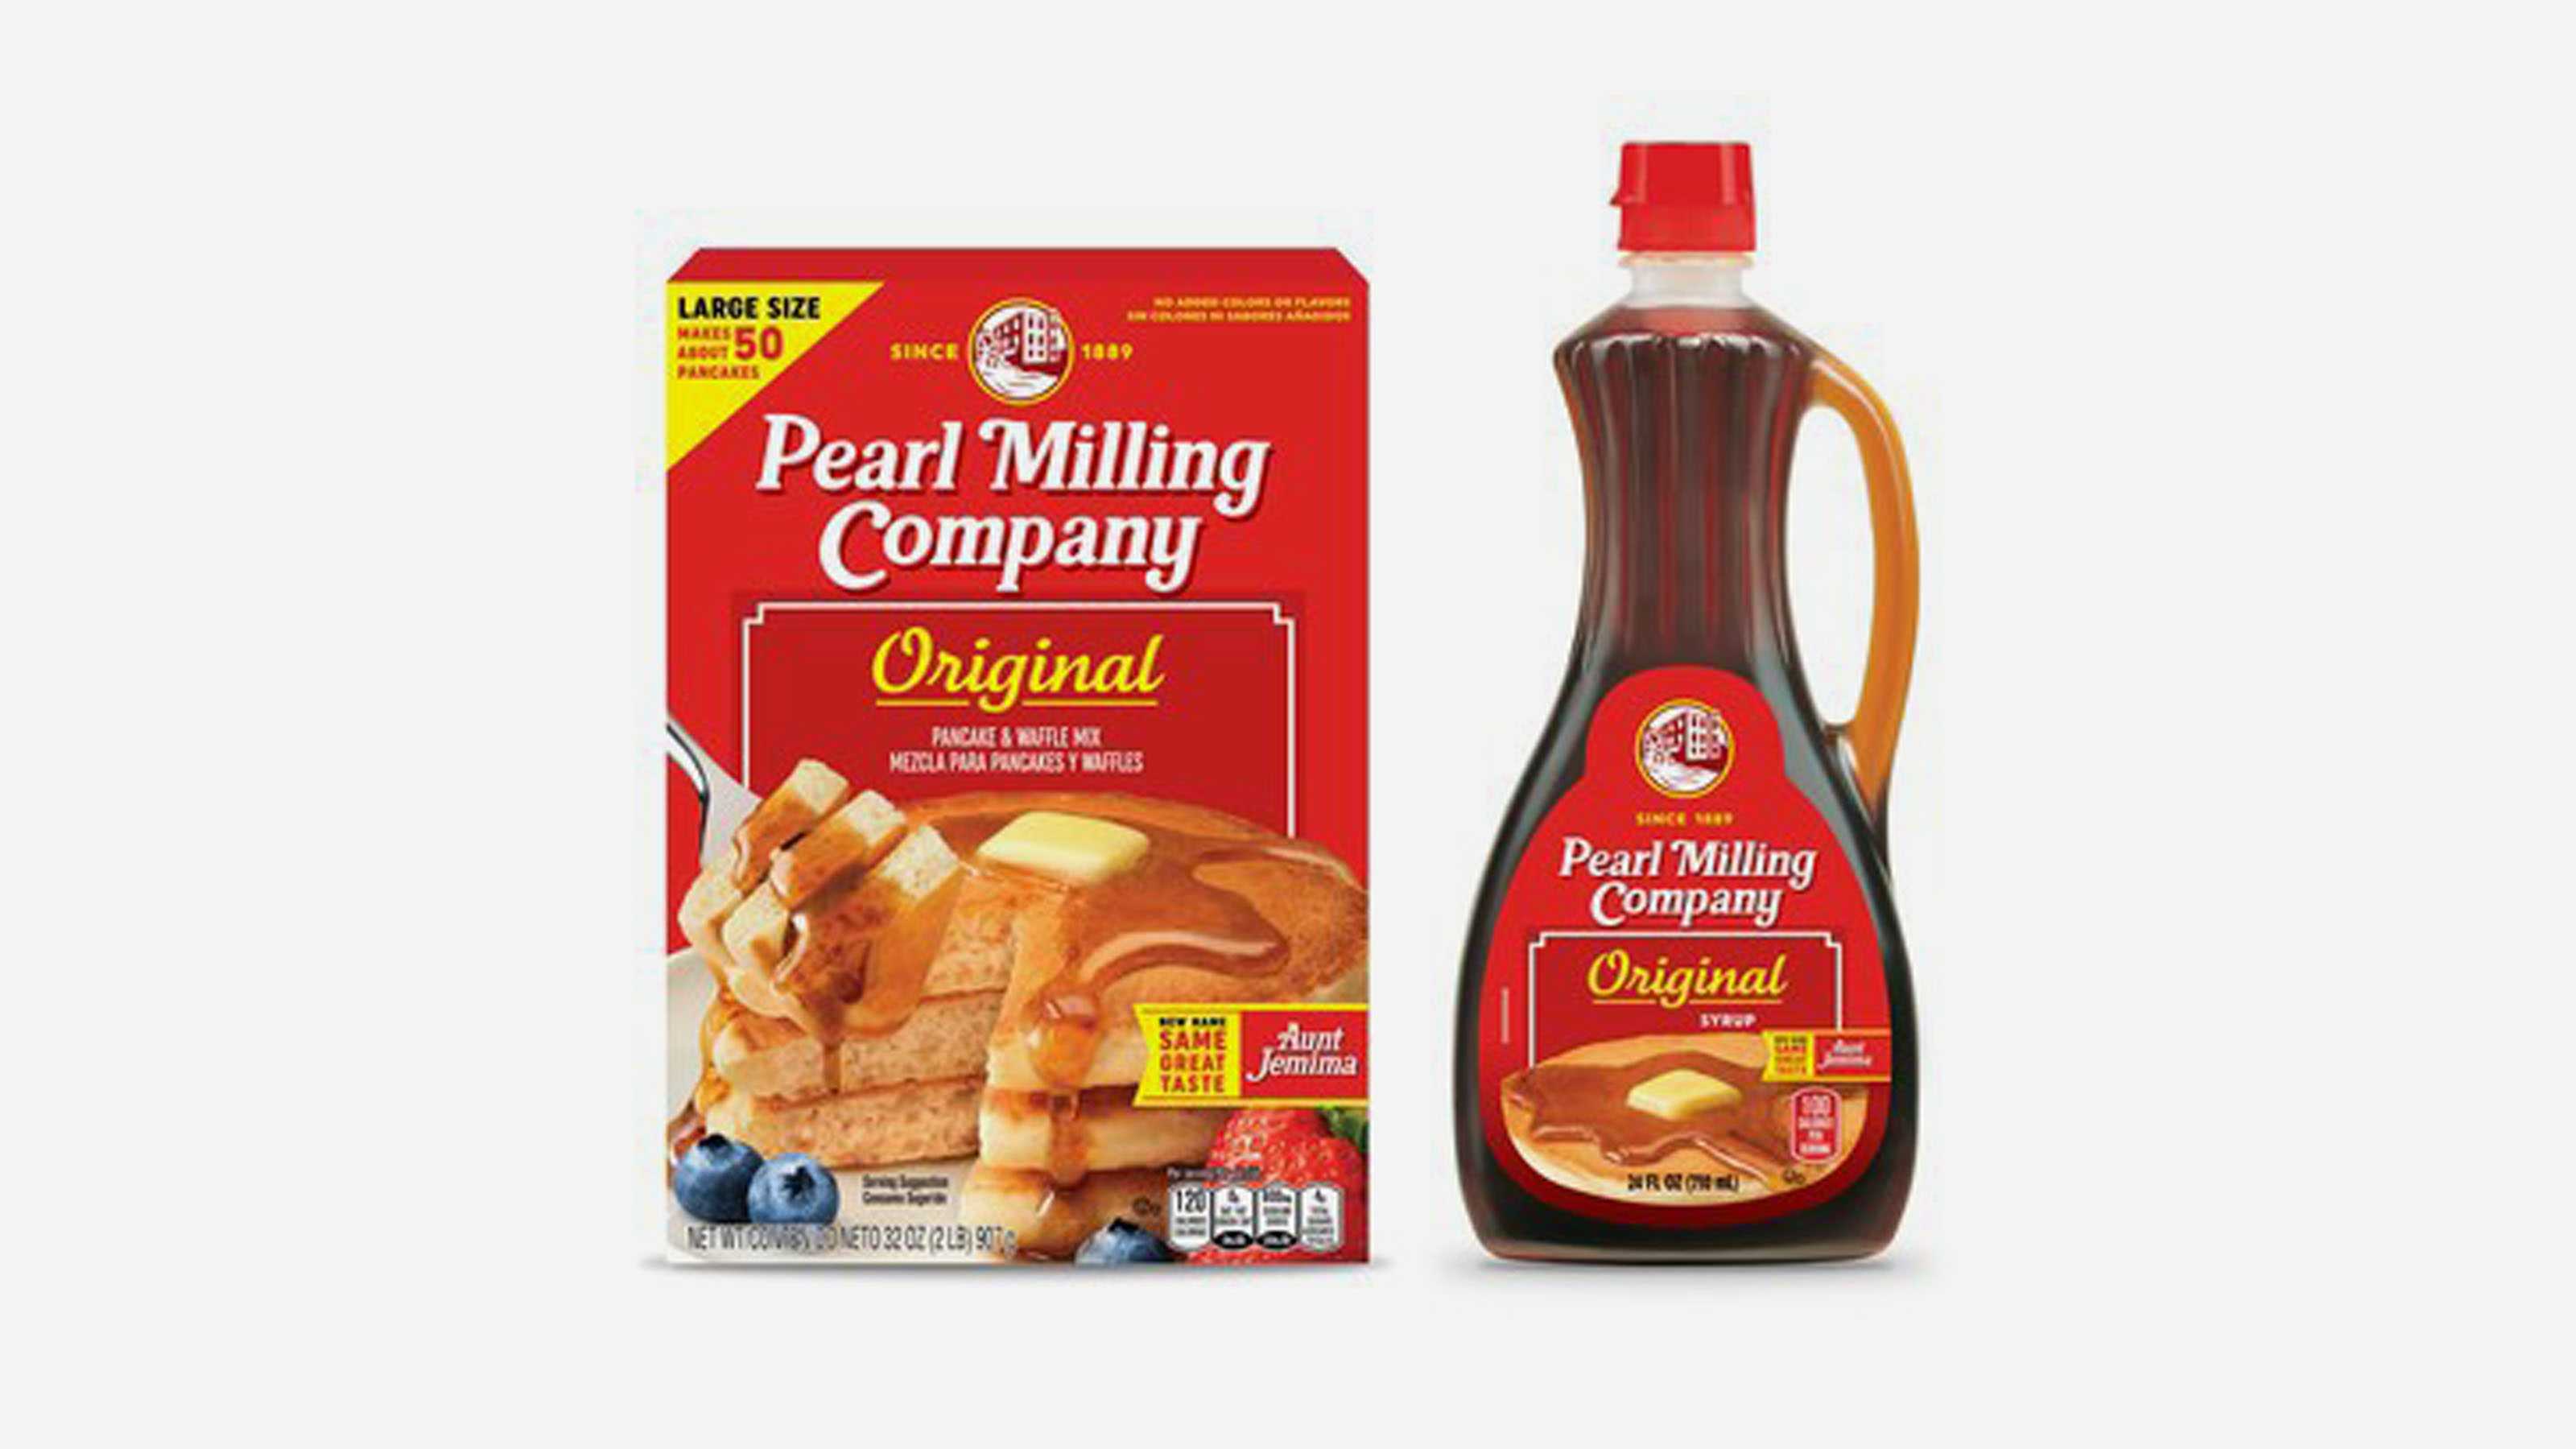 Pearl Milling Company ﻿pancake mix and syrup are hitting shelves, replacing ﻿Aunt Jemima